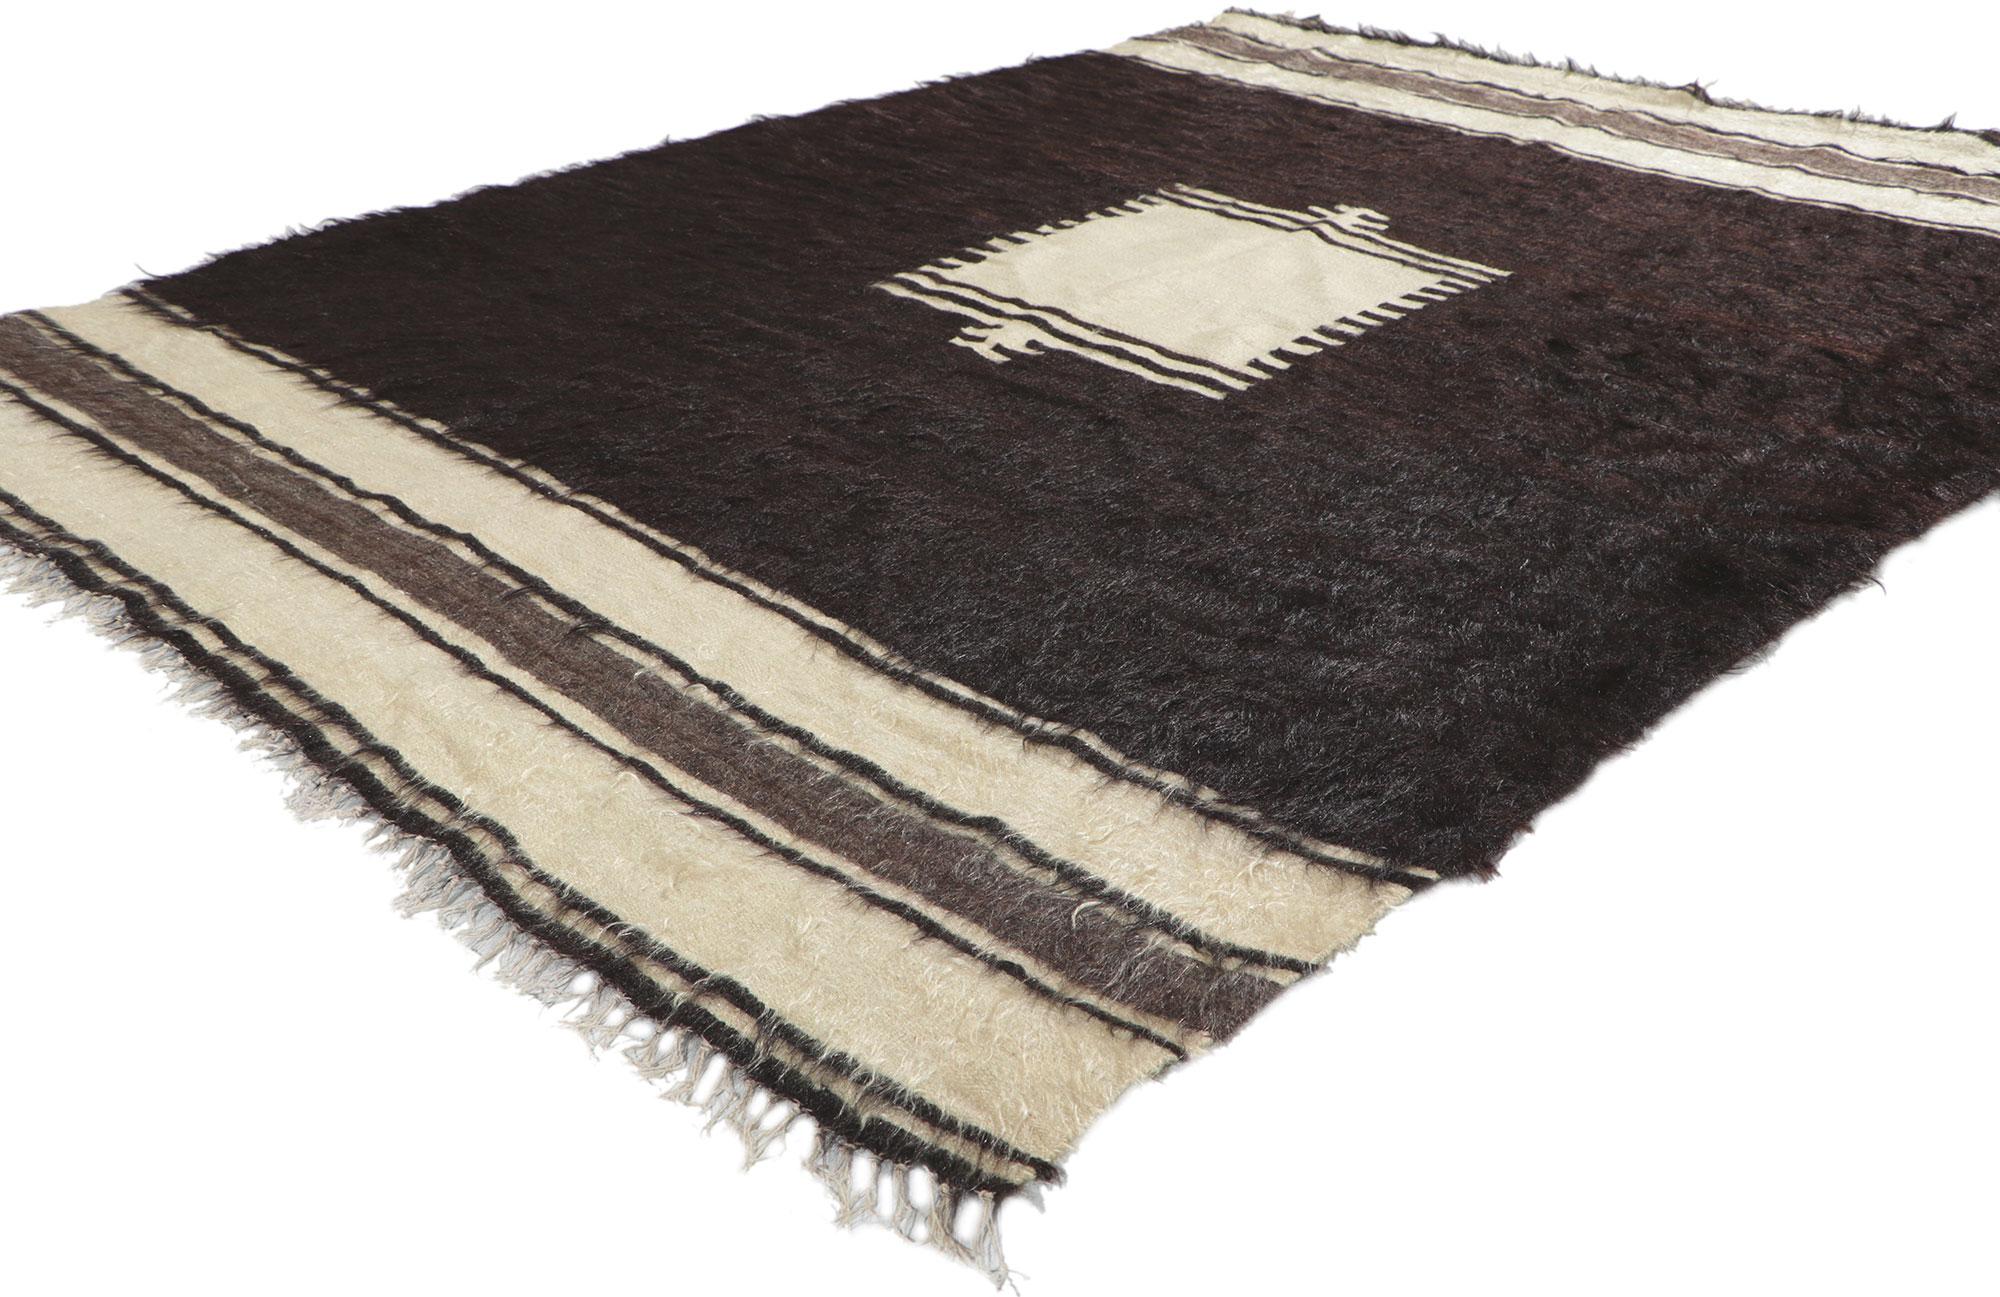 53848 Vintage Turkish Angora Wool Blanket Kilim rug, 04'06 x 05'11. With its shaggy pile, incredible detail and texture, this handwoven Turkish angora kilim rug is a captivating vision of woven beauty. The eye-catching geometric design and earthy